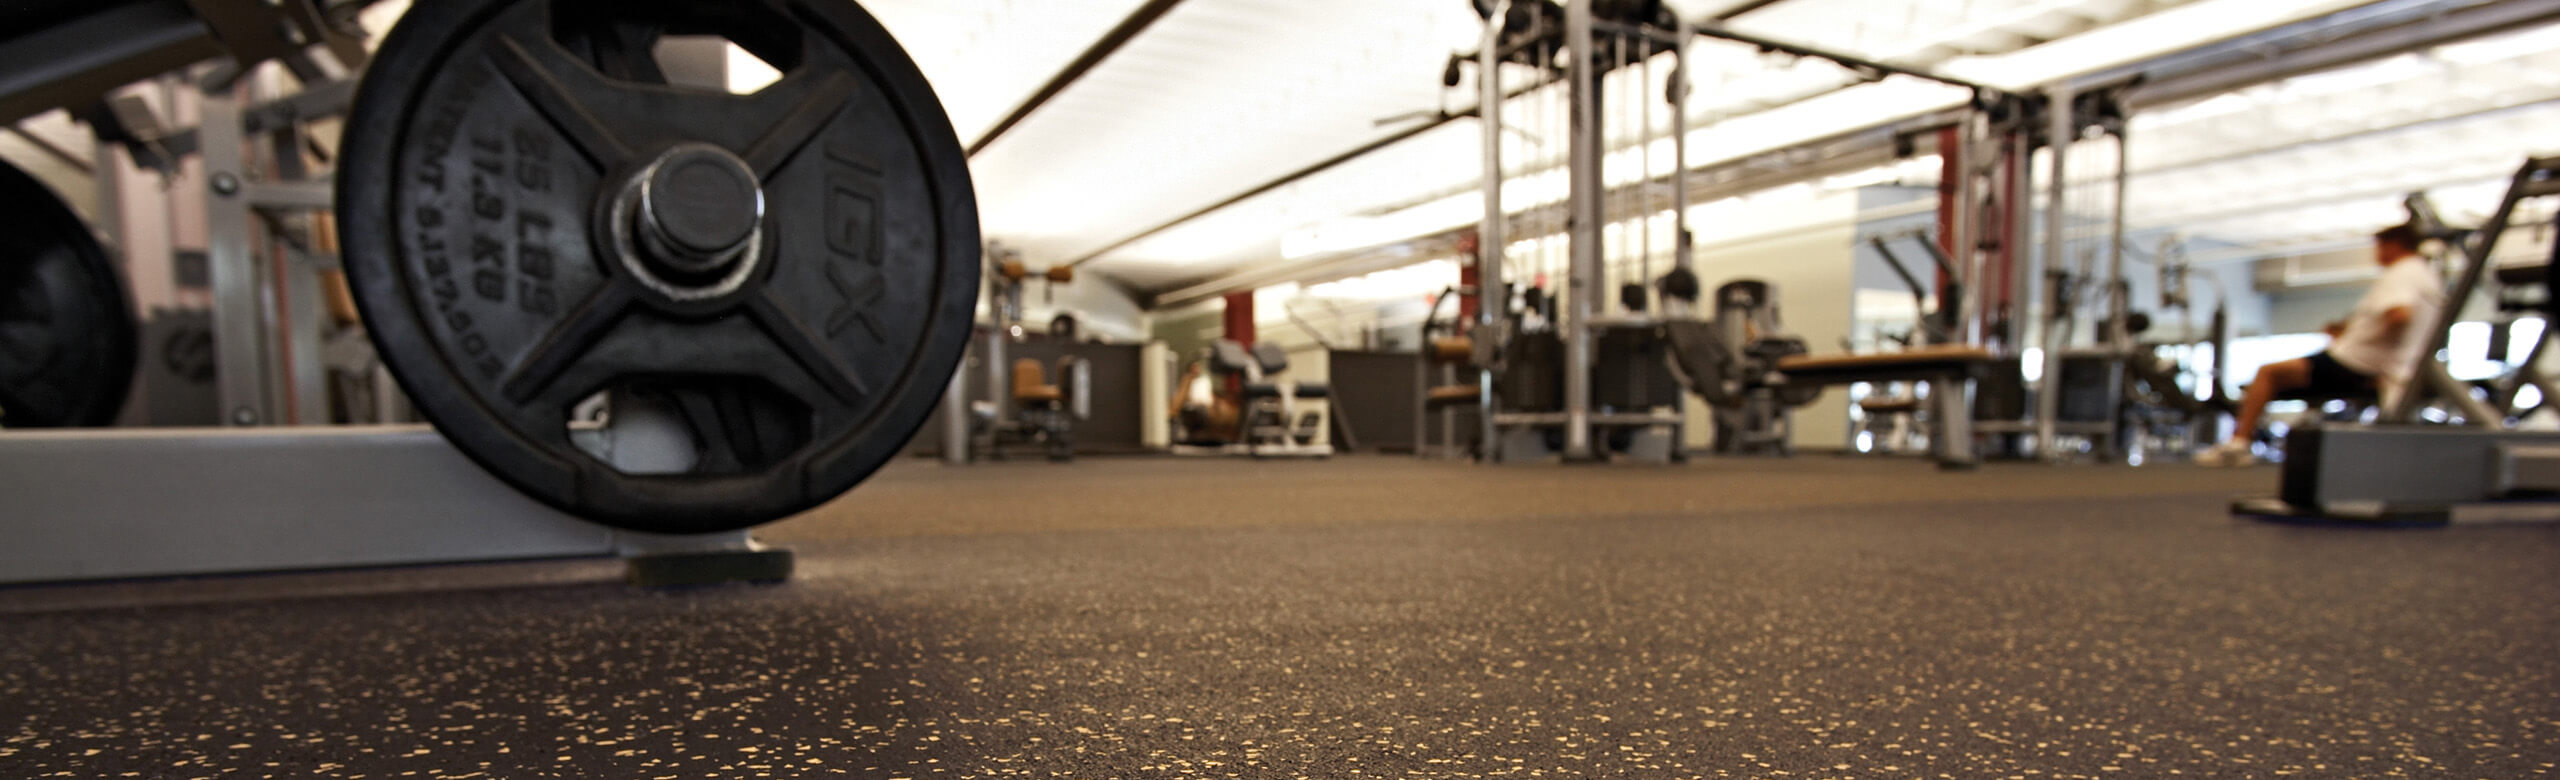 REGUPOL aktiv rubber flooring for gyms and fitness centers